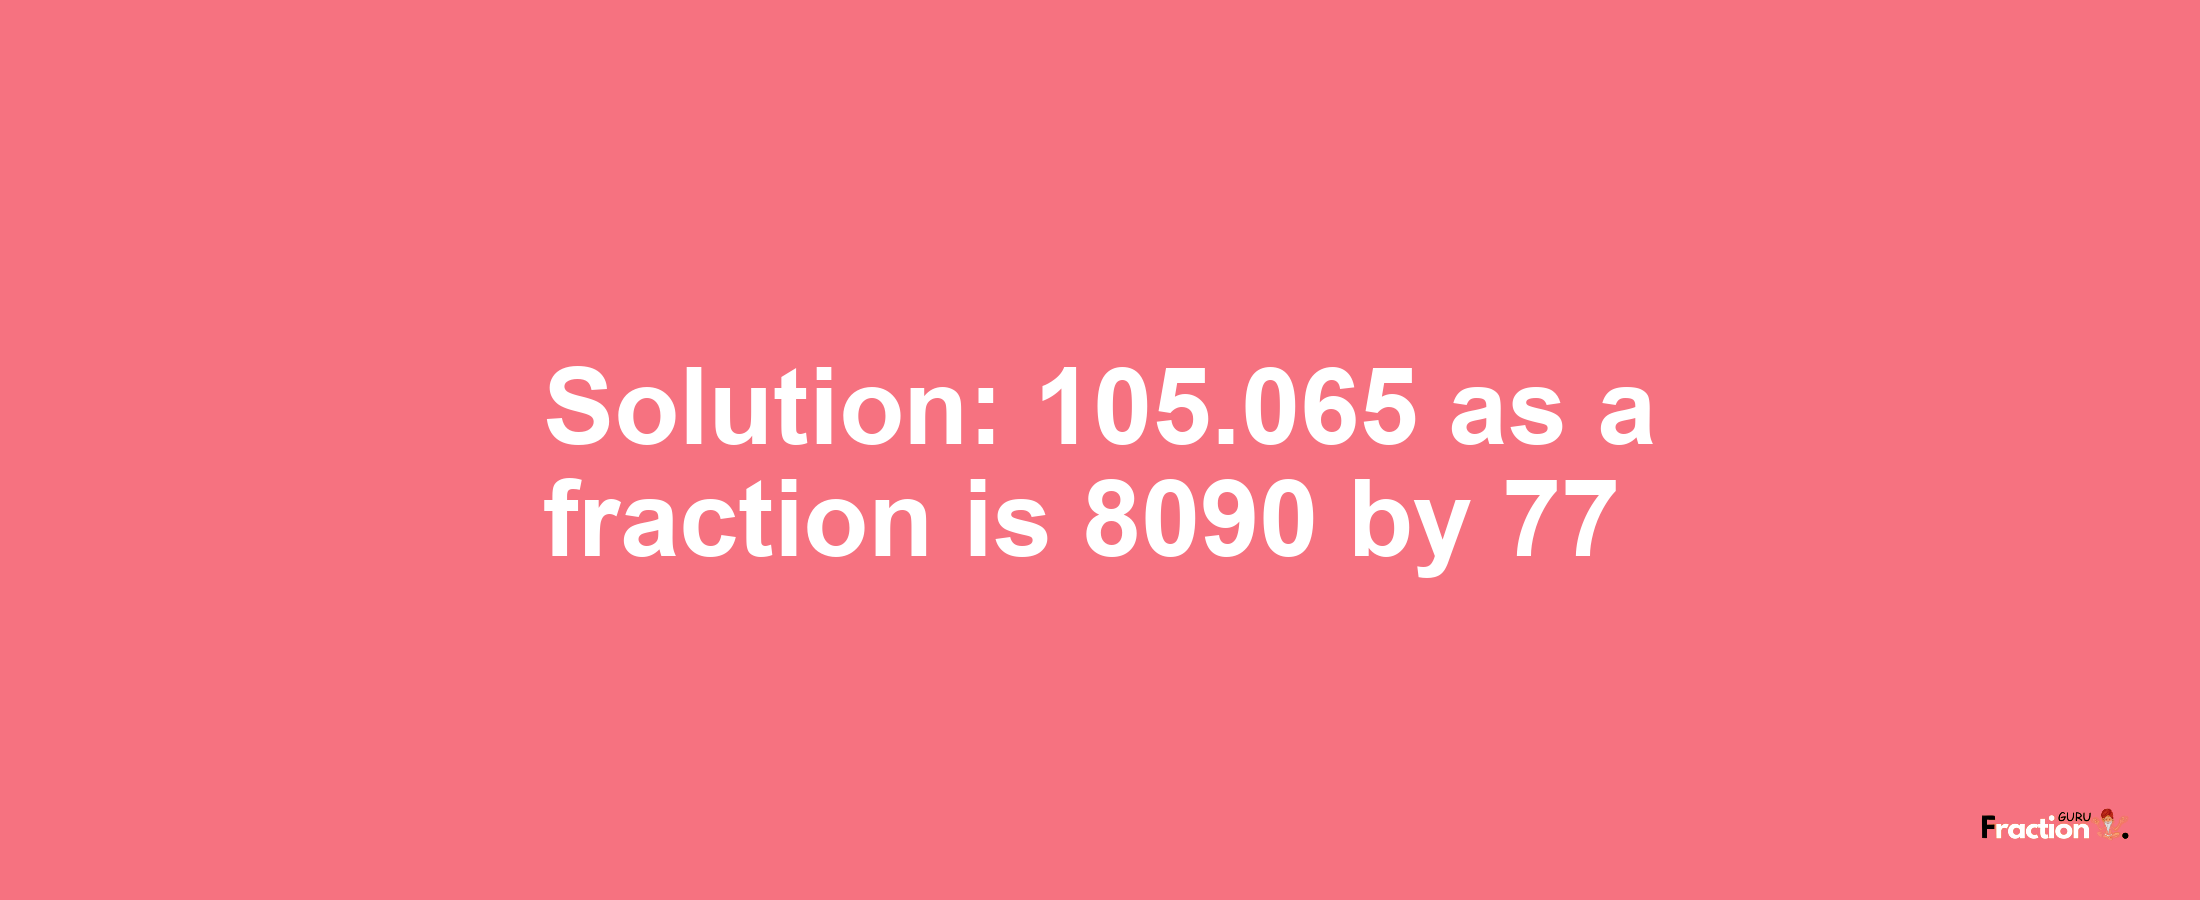 Solution:105.065 as a fraction is 8090/77